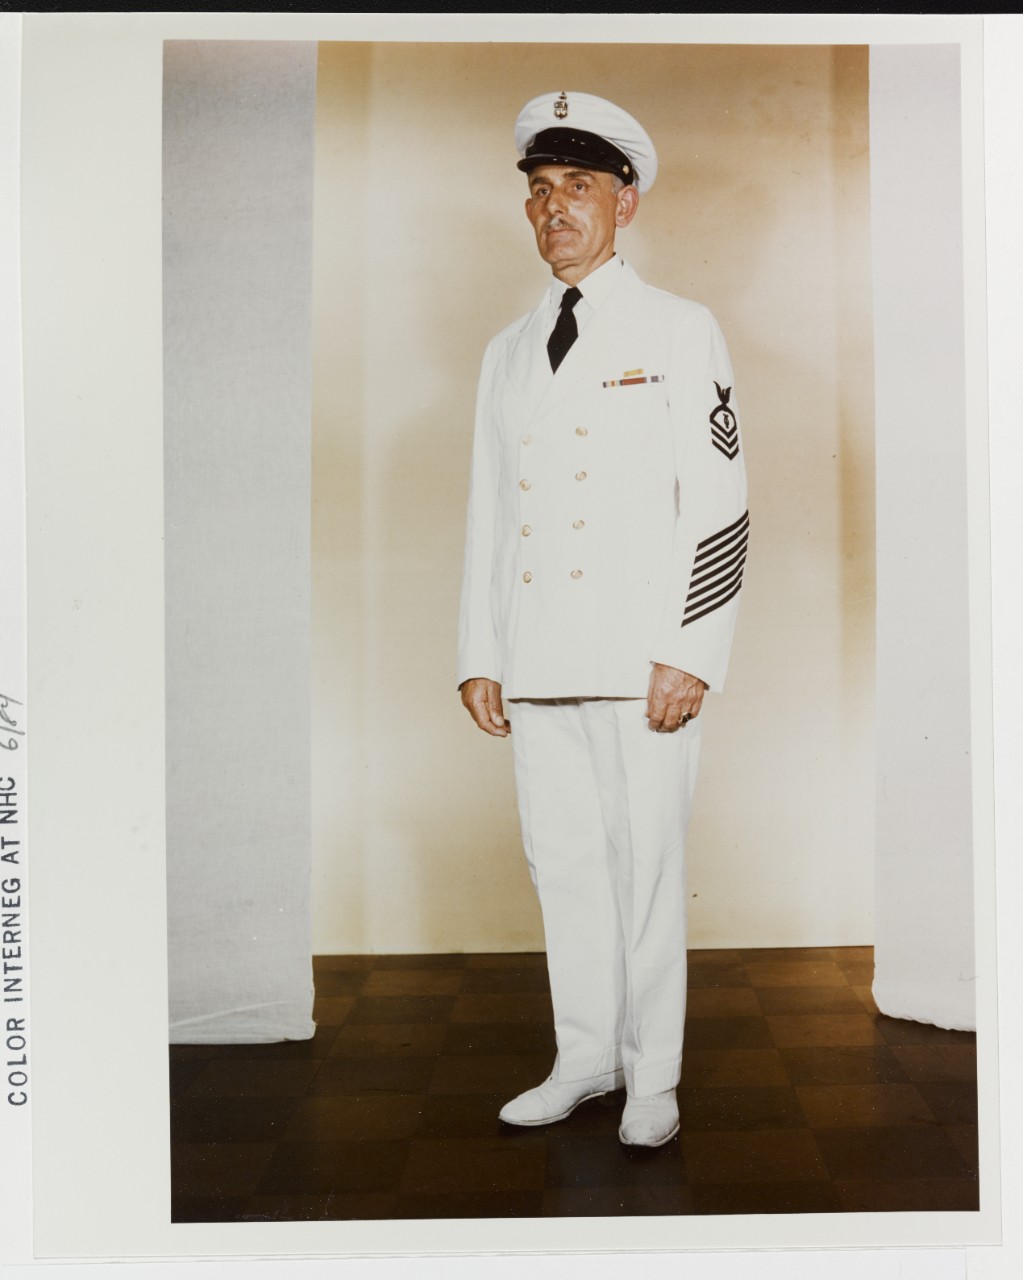 Chief Petty Officer -Musician